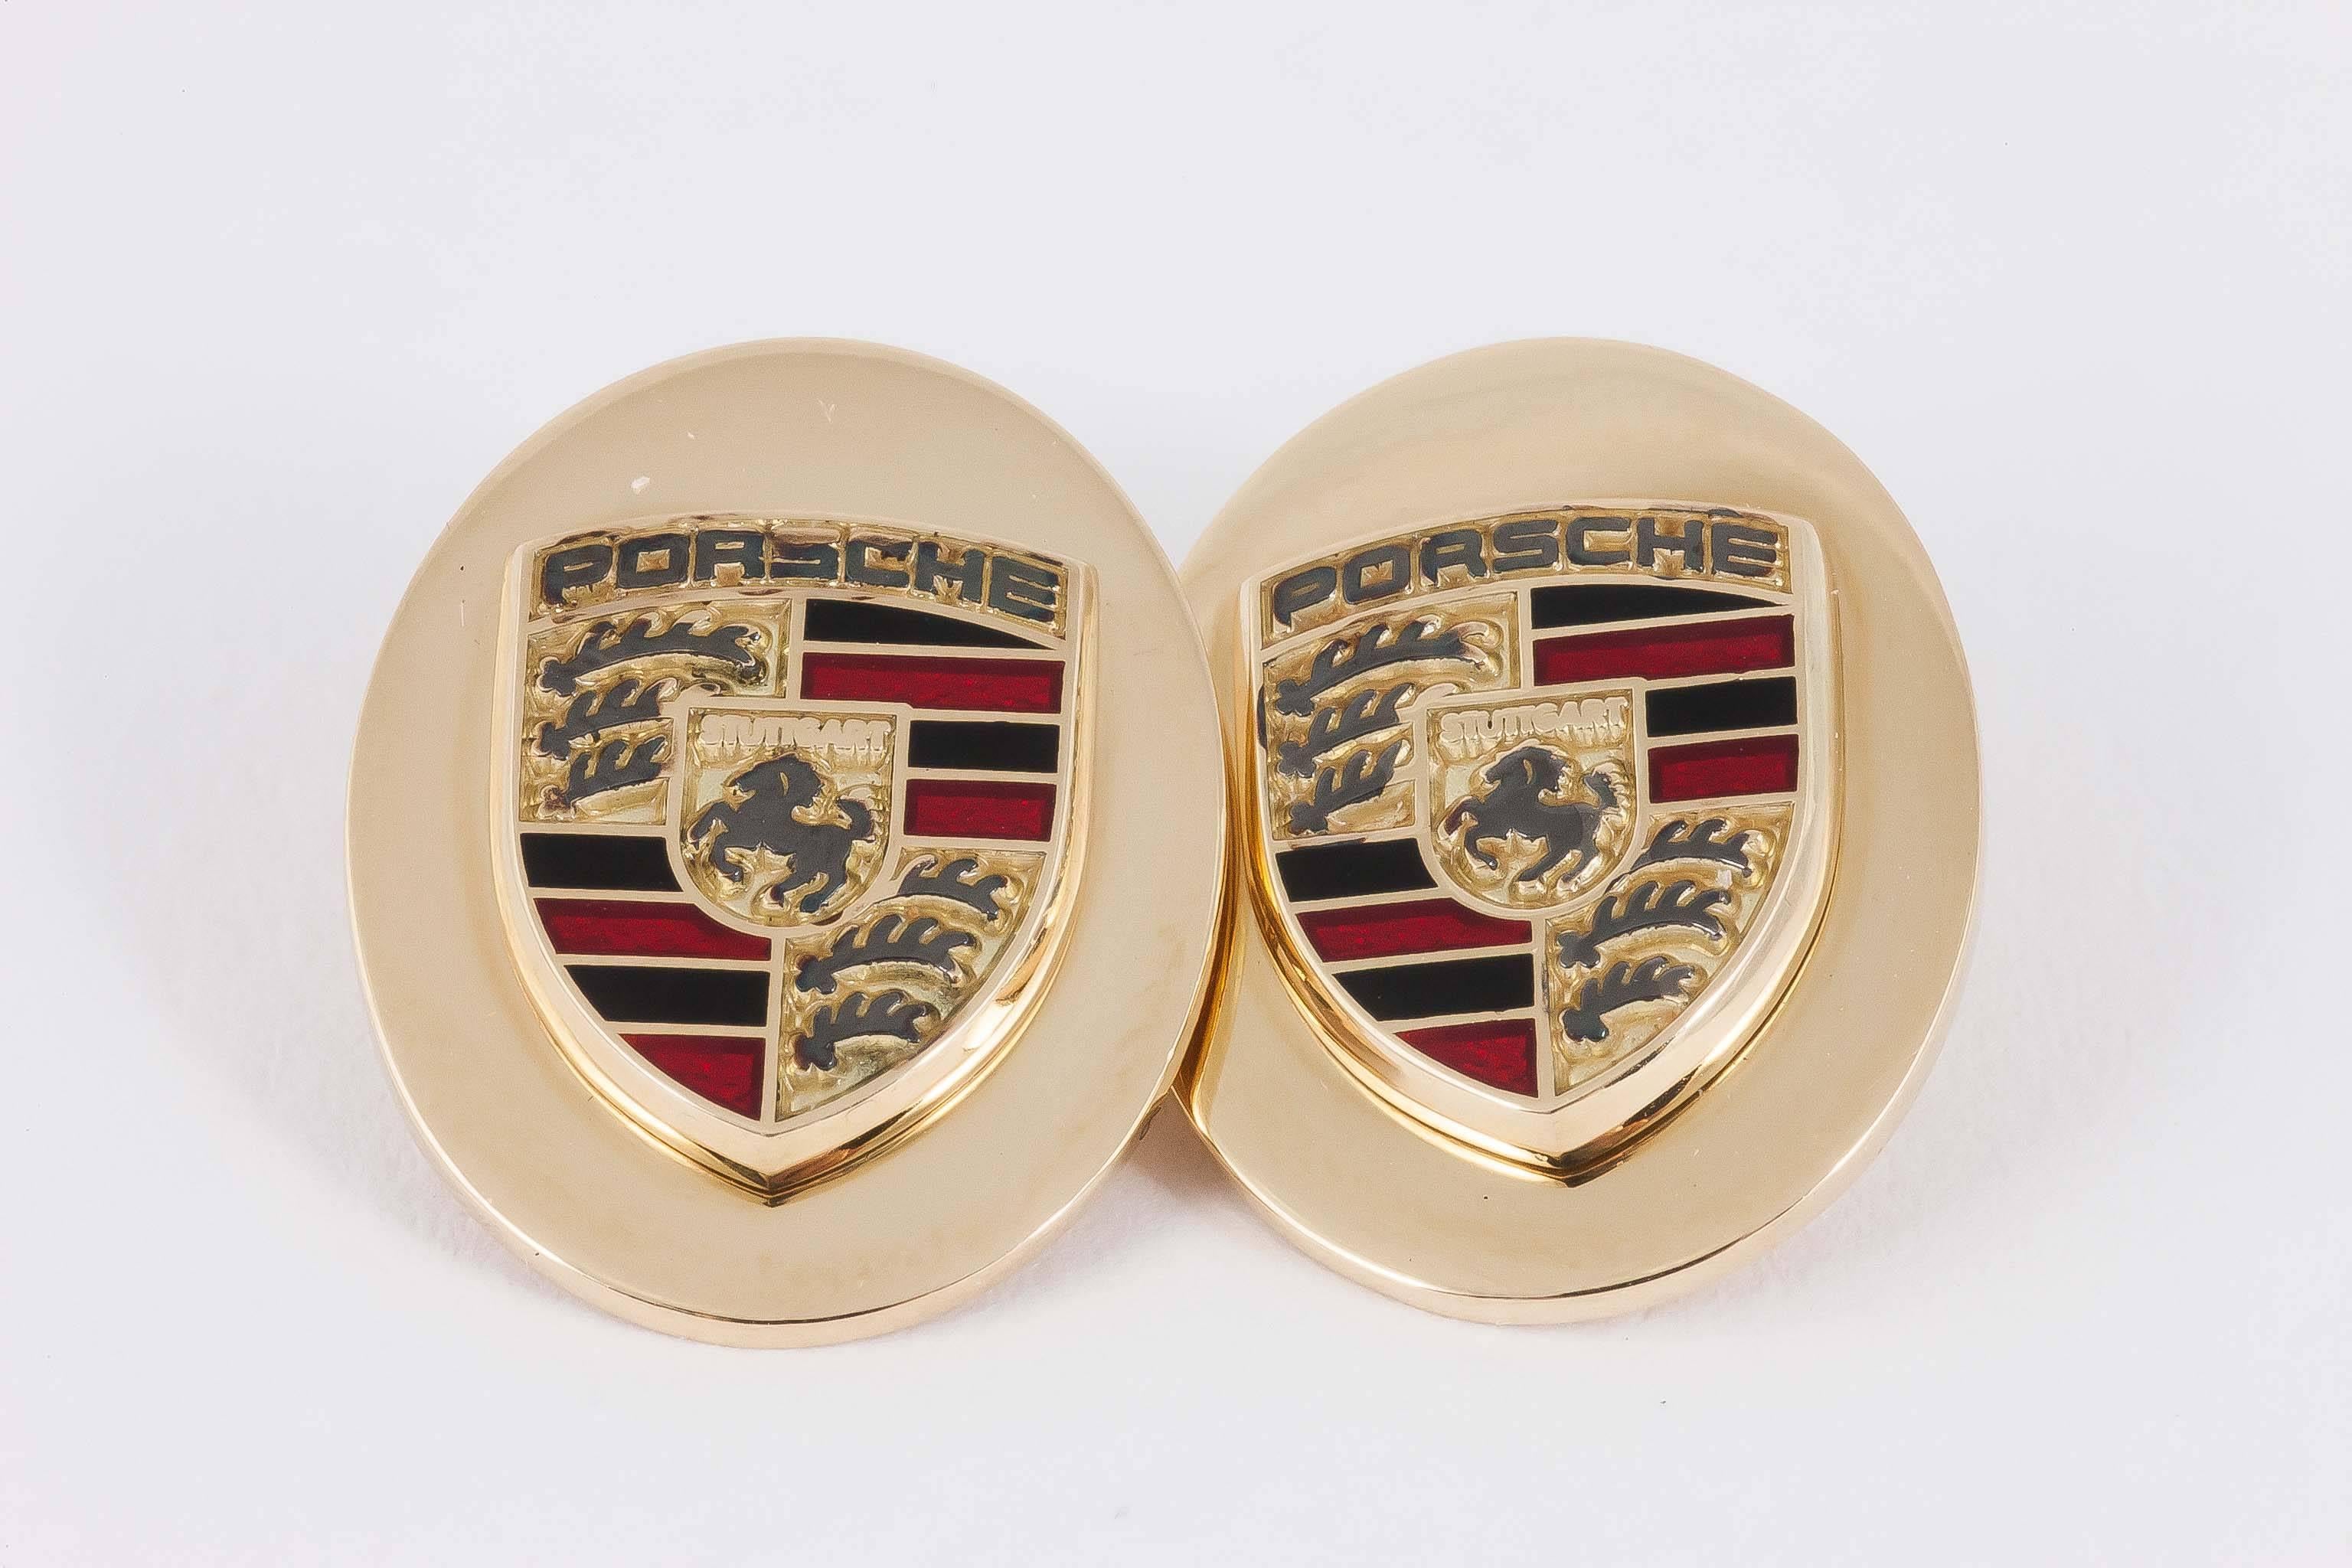 A heavy pair of fine quality oval double sided cufflinks in 18 carat yellow gold with the emblem of the Porsche motor car en relief in black and red enamel. Designed exclusively for Nigel Norman Fine Jewels of Grays Antiques Centre London by a